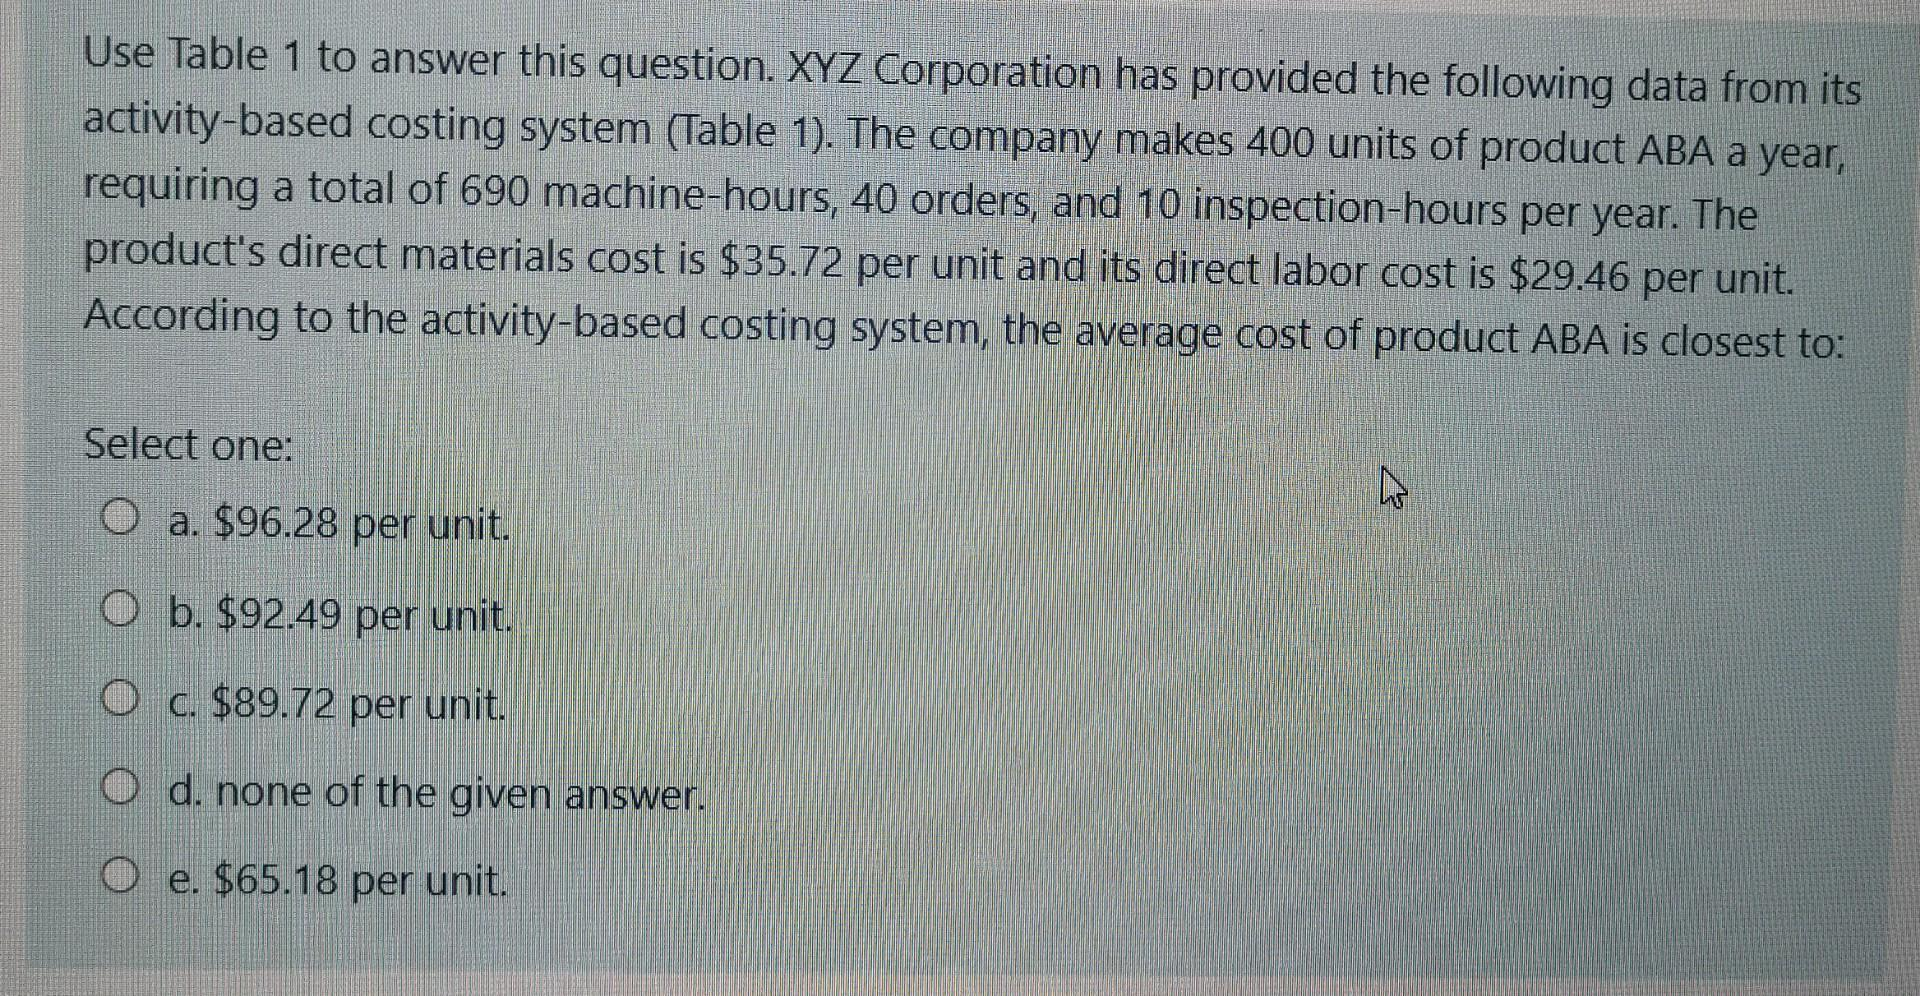 Use Table 1 to answer this question. XYZ Corporation has provided the following data from its activity-based